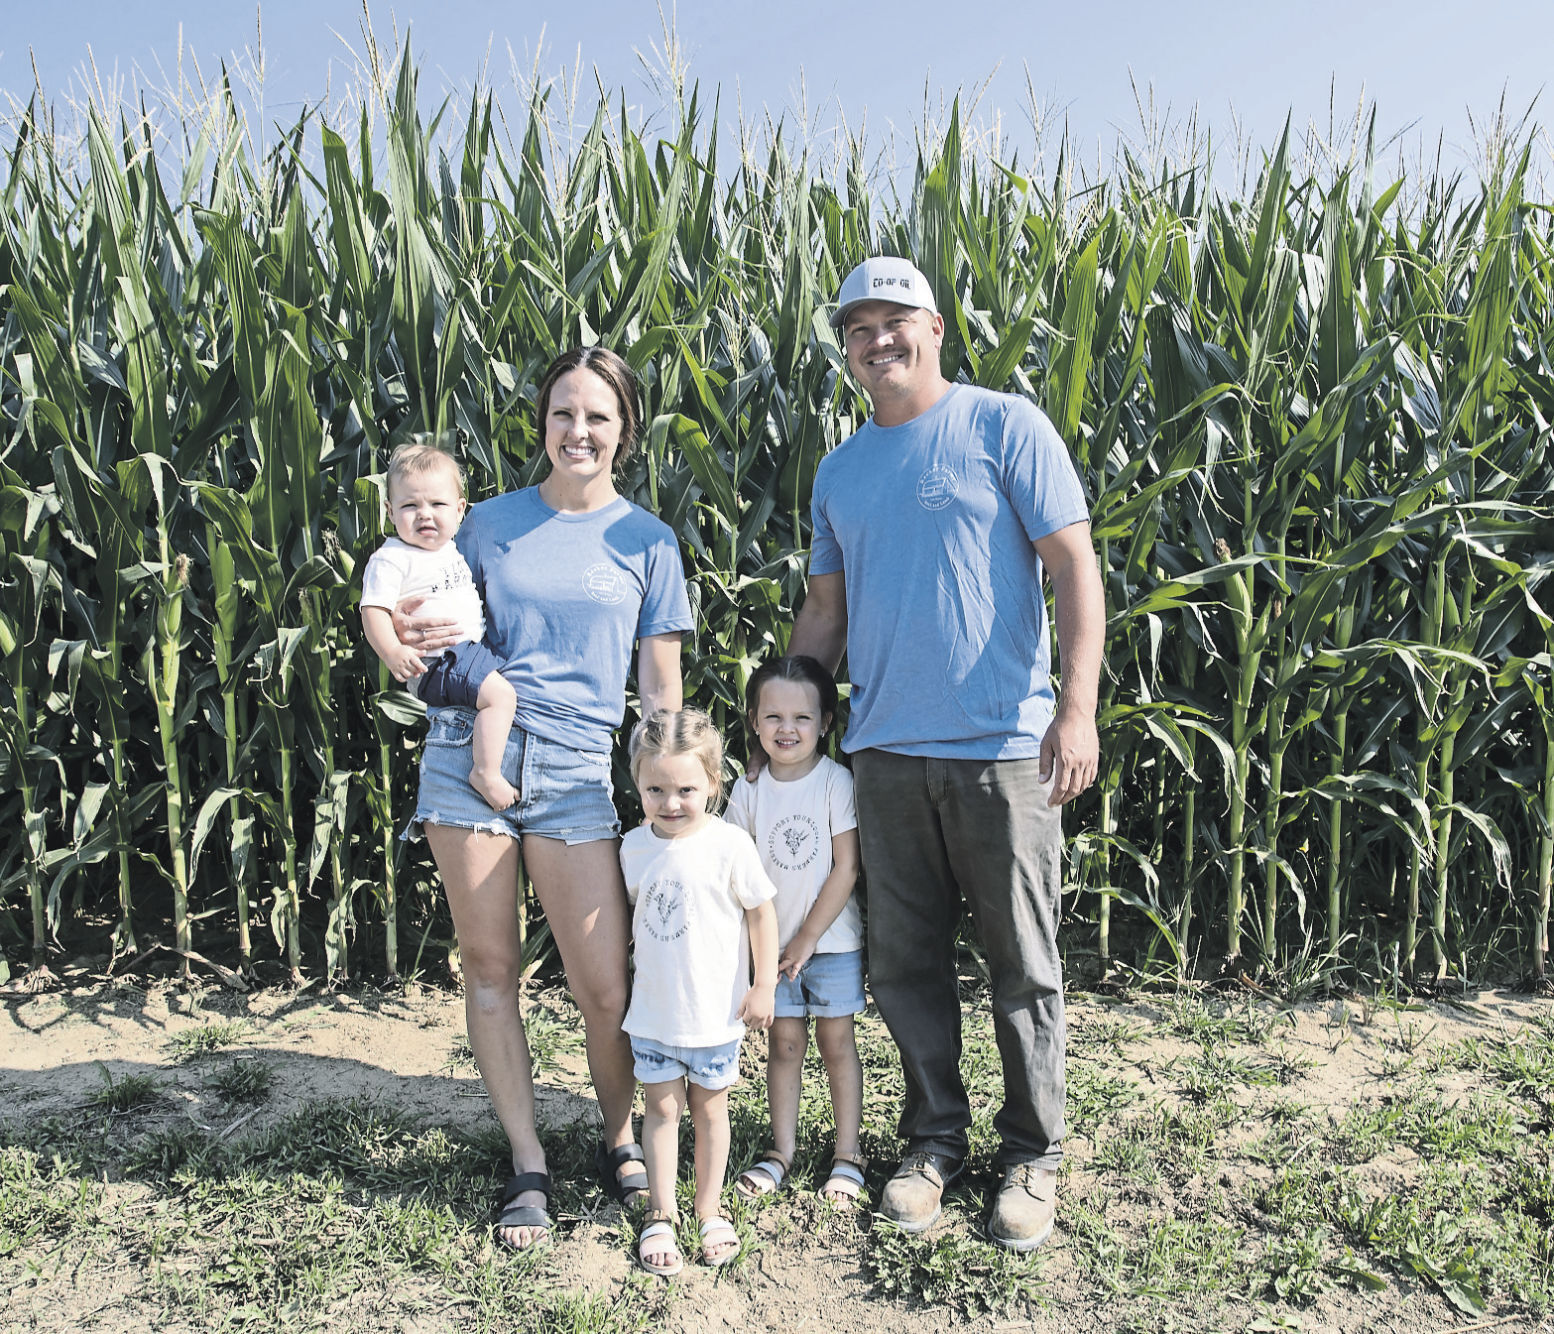 The Recker family -- Ford, 8 months old (left); Cara; Wynnie, 3; Willow, 4; and Joe -- on their farm in rural Dyersville, Iowa.    PHOTO CREDIT: Stephen Gassman, Telegraph Herald